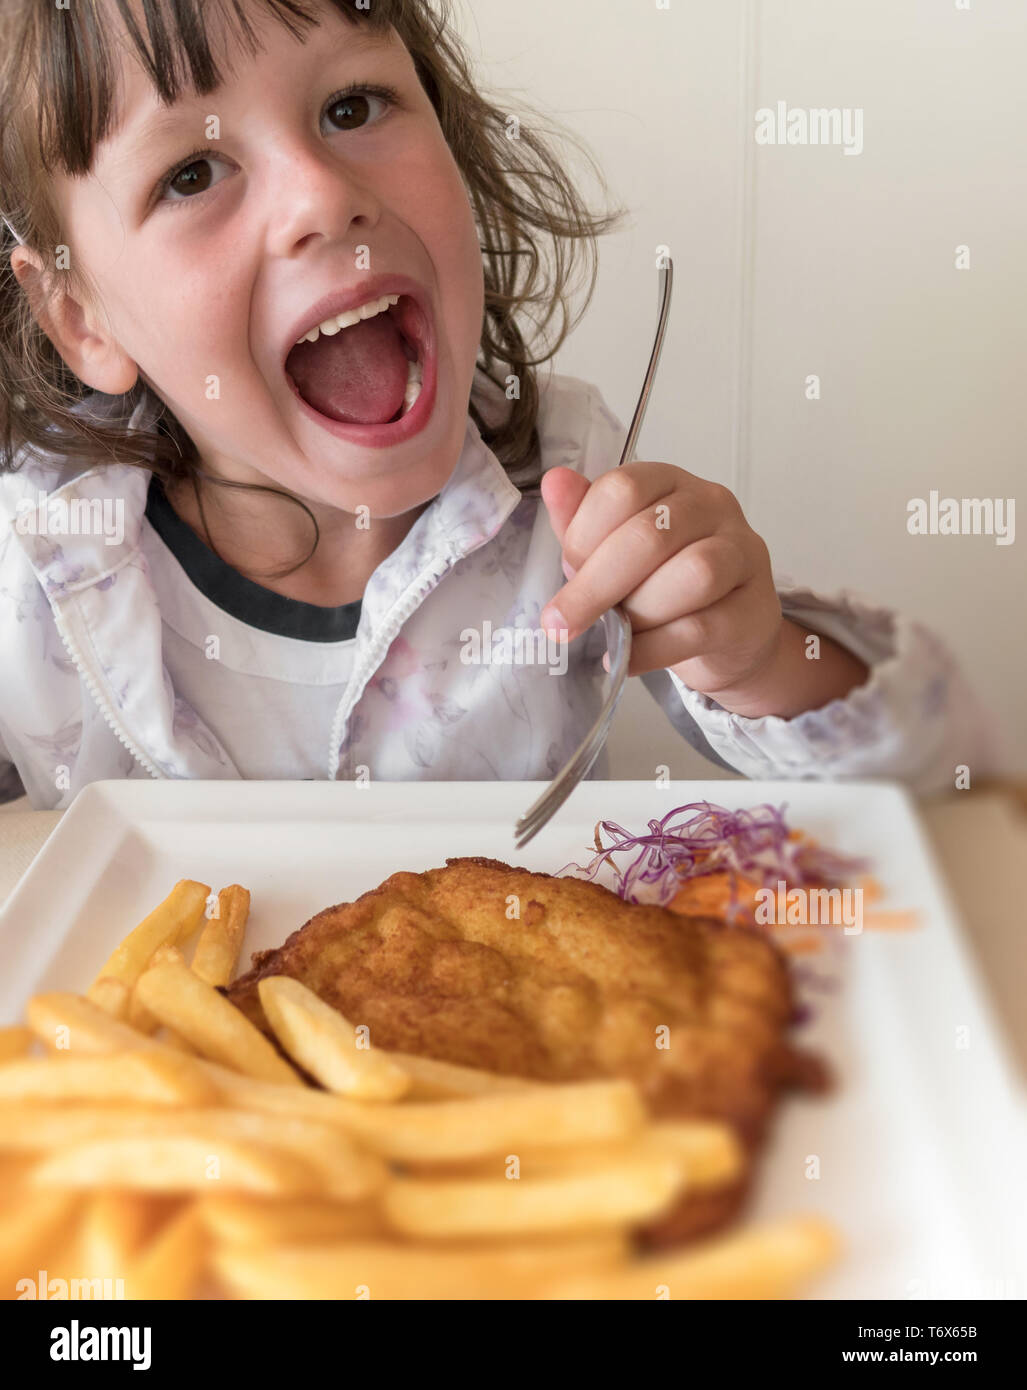 Little Italian girl eating breaded meat and french fries Stock Photo